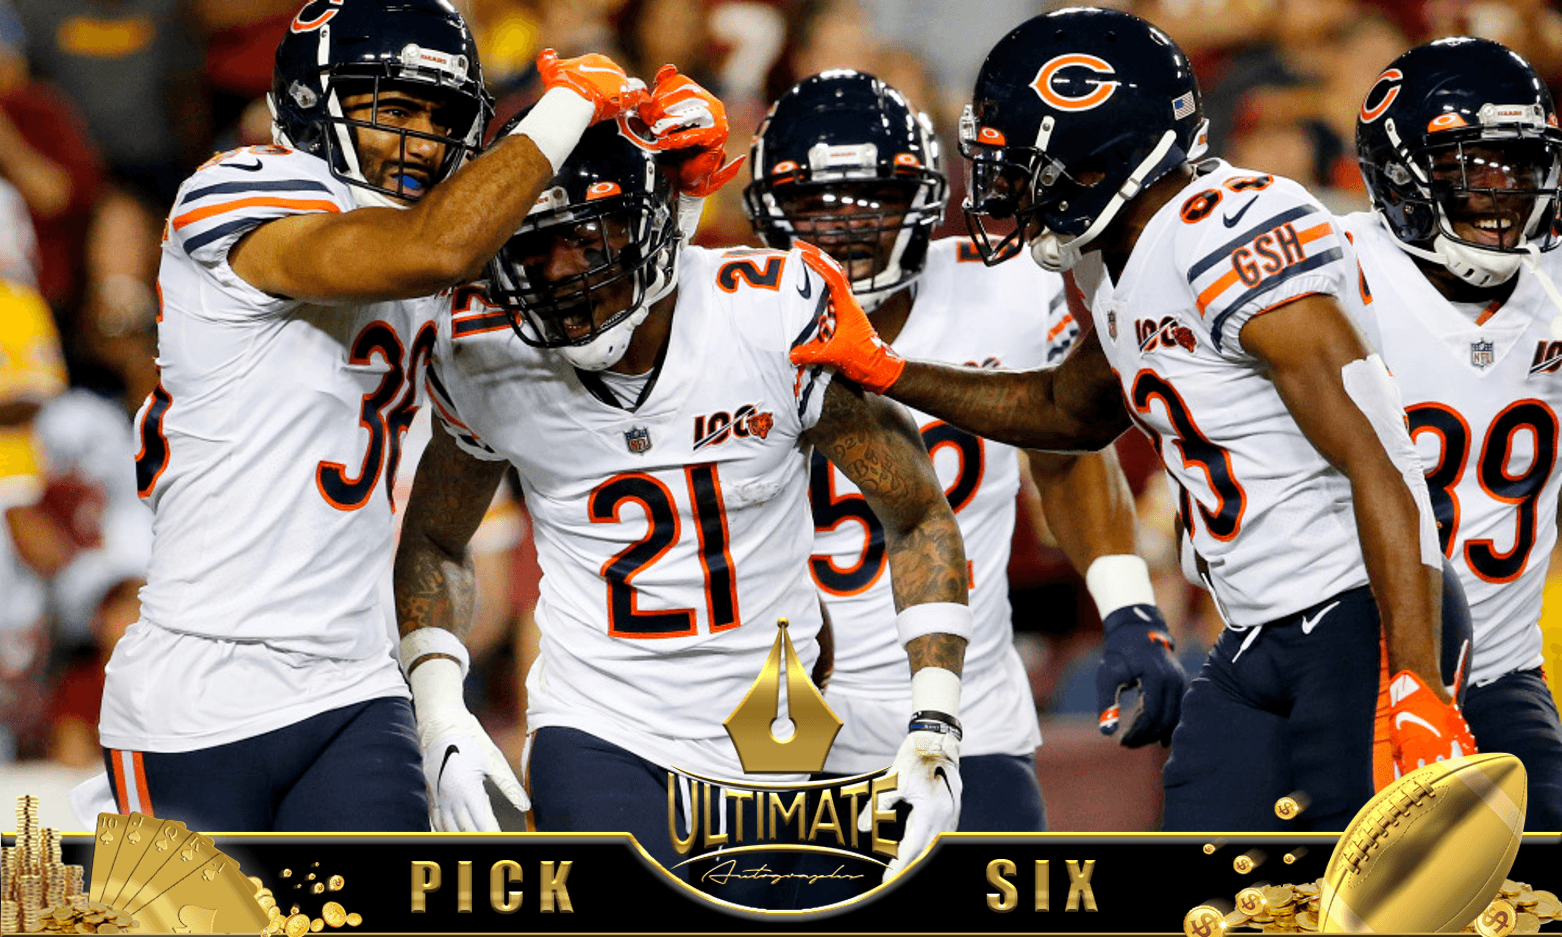 Ultimate Pick 6: Chicago Bears Defense to Feast on Thanksgiving